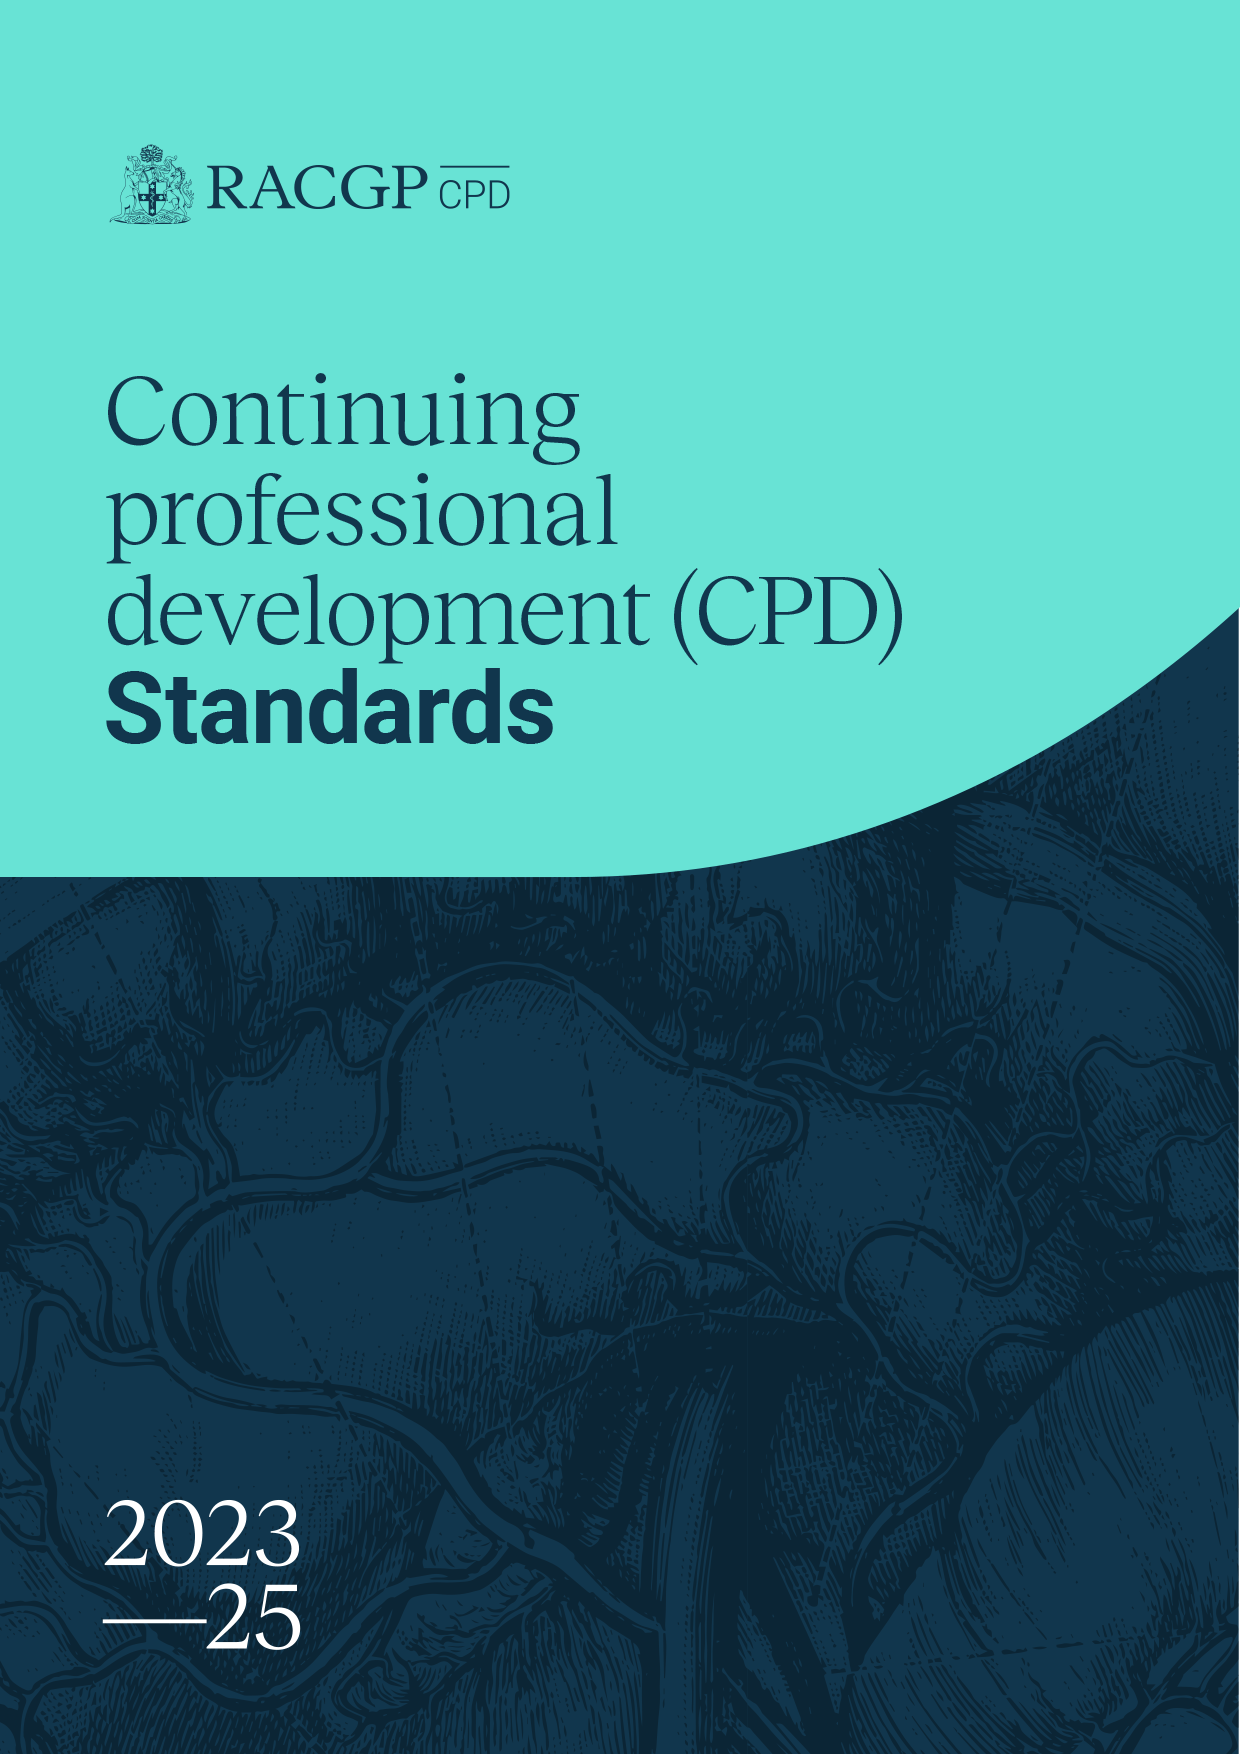 Continuing professional development (CPD) Standards